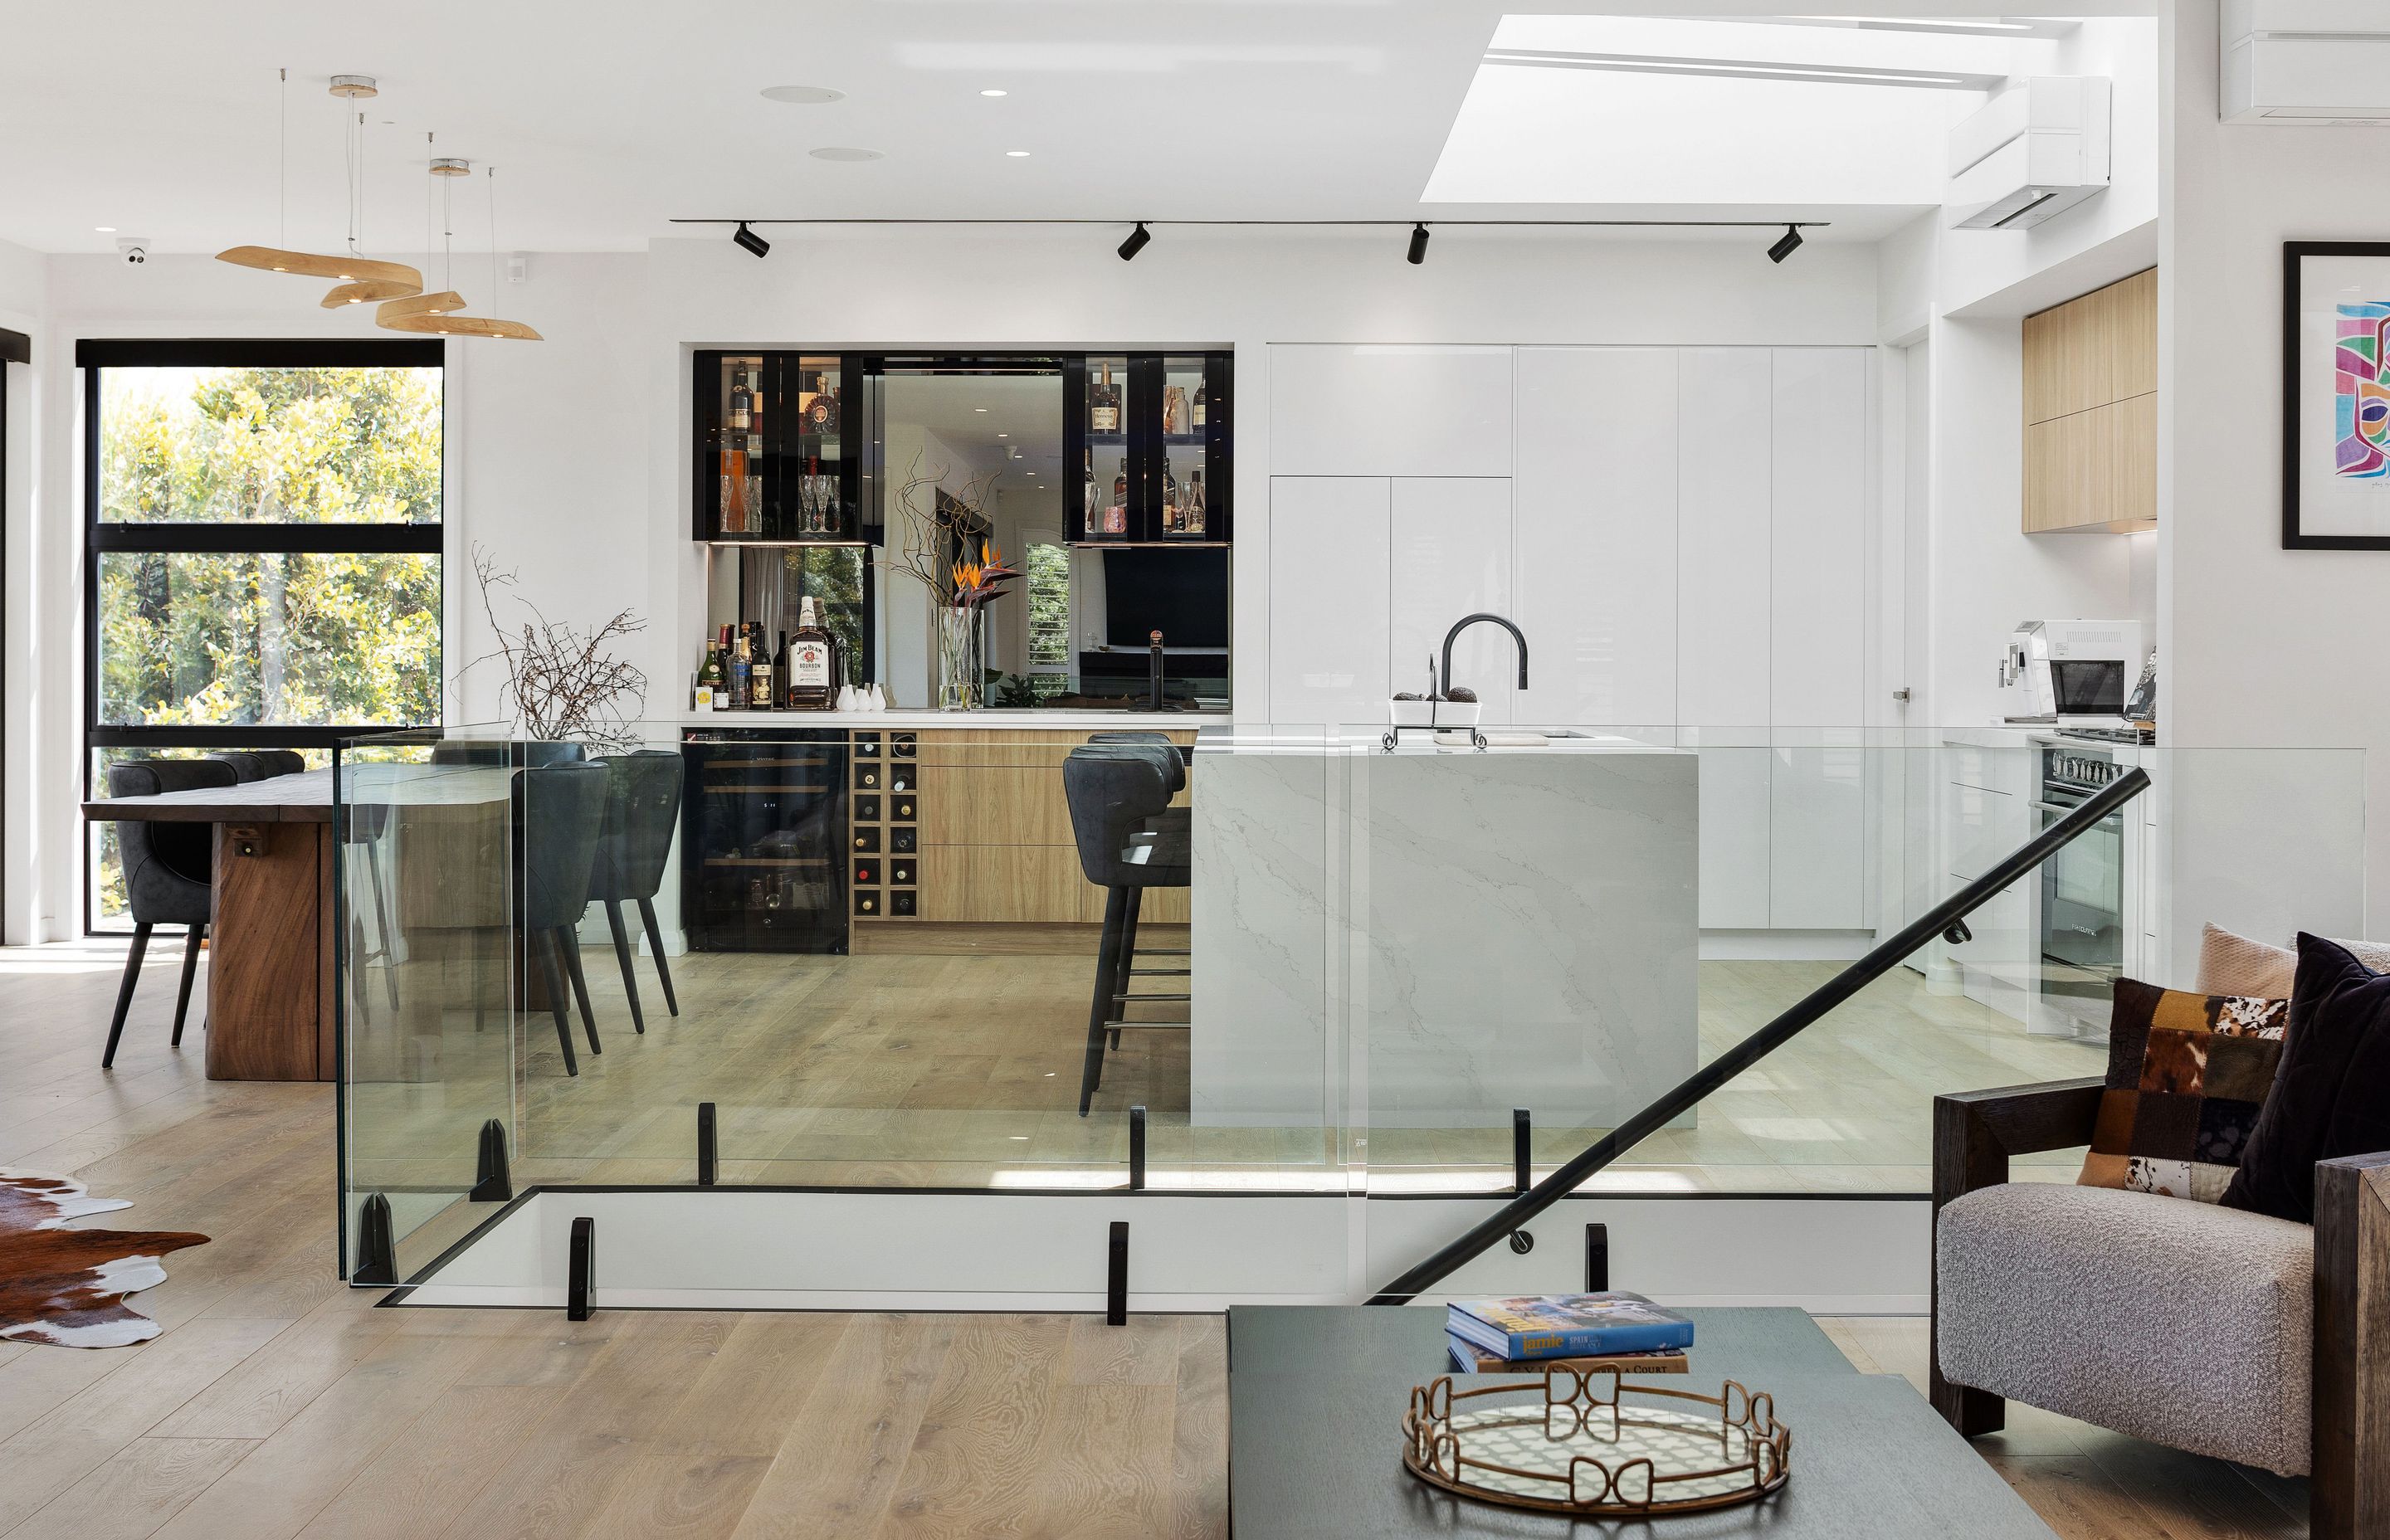 The open-plan kitchen and dining area features a mirrored bar.